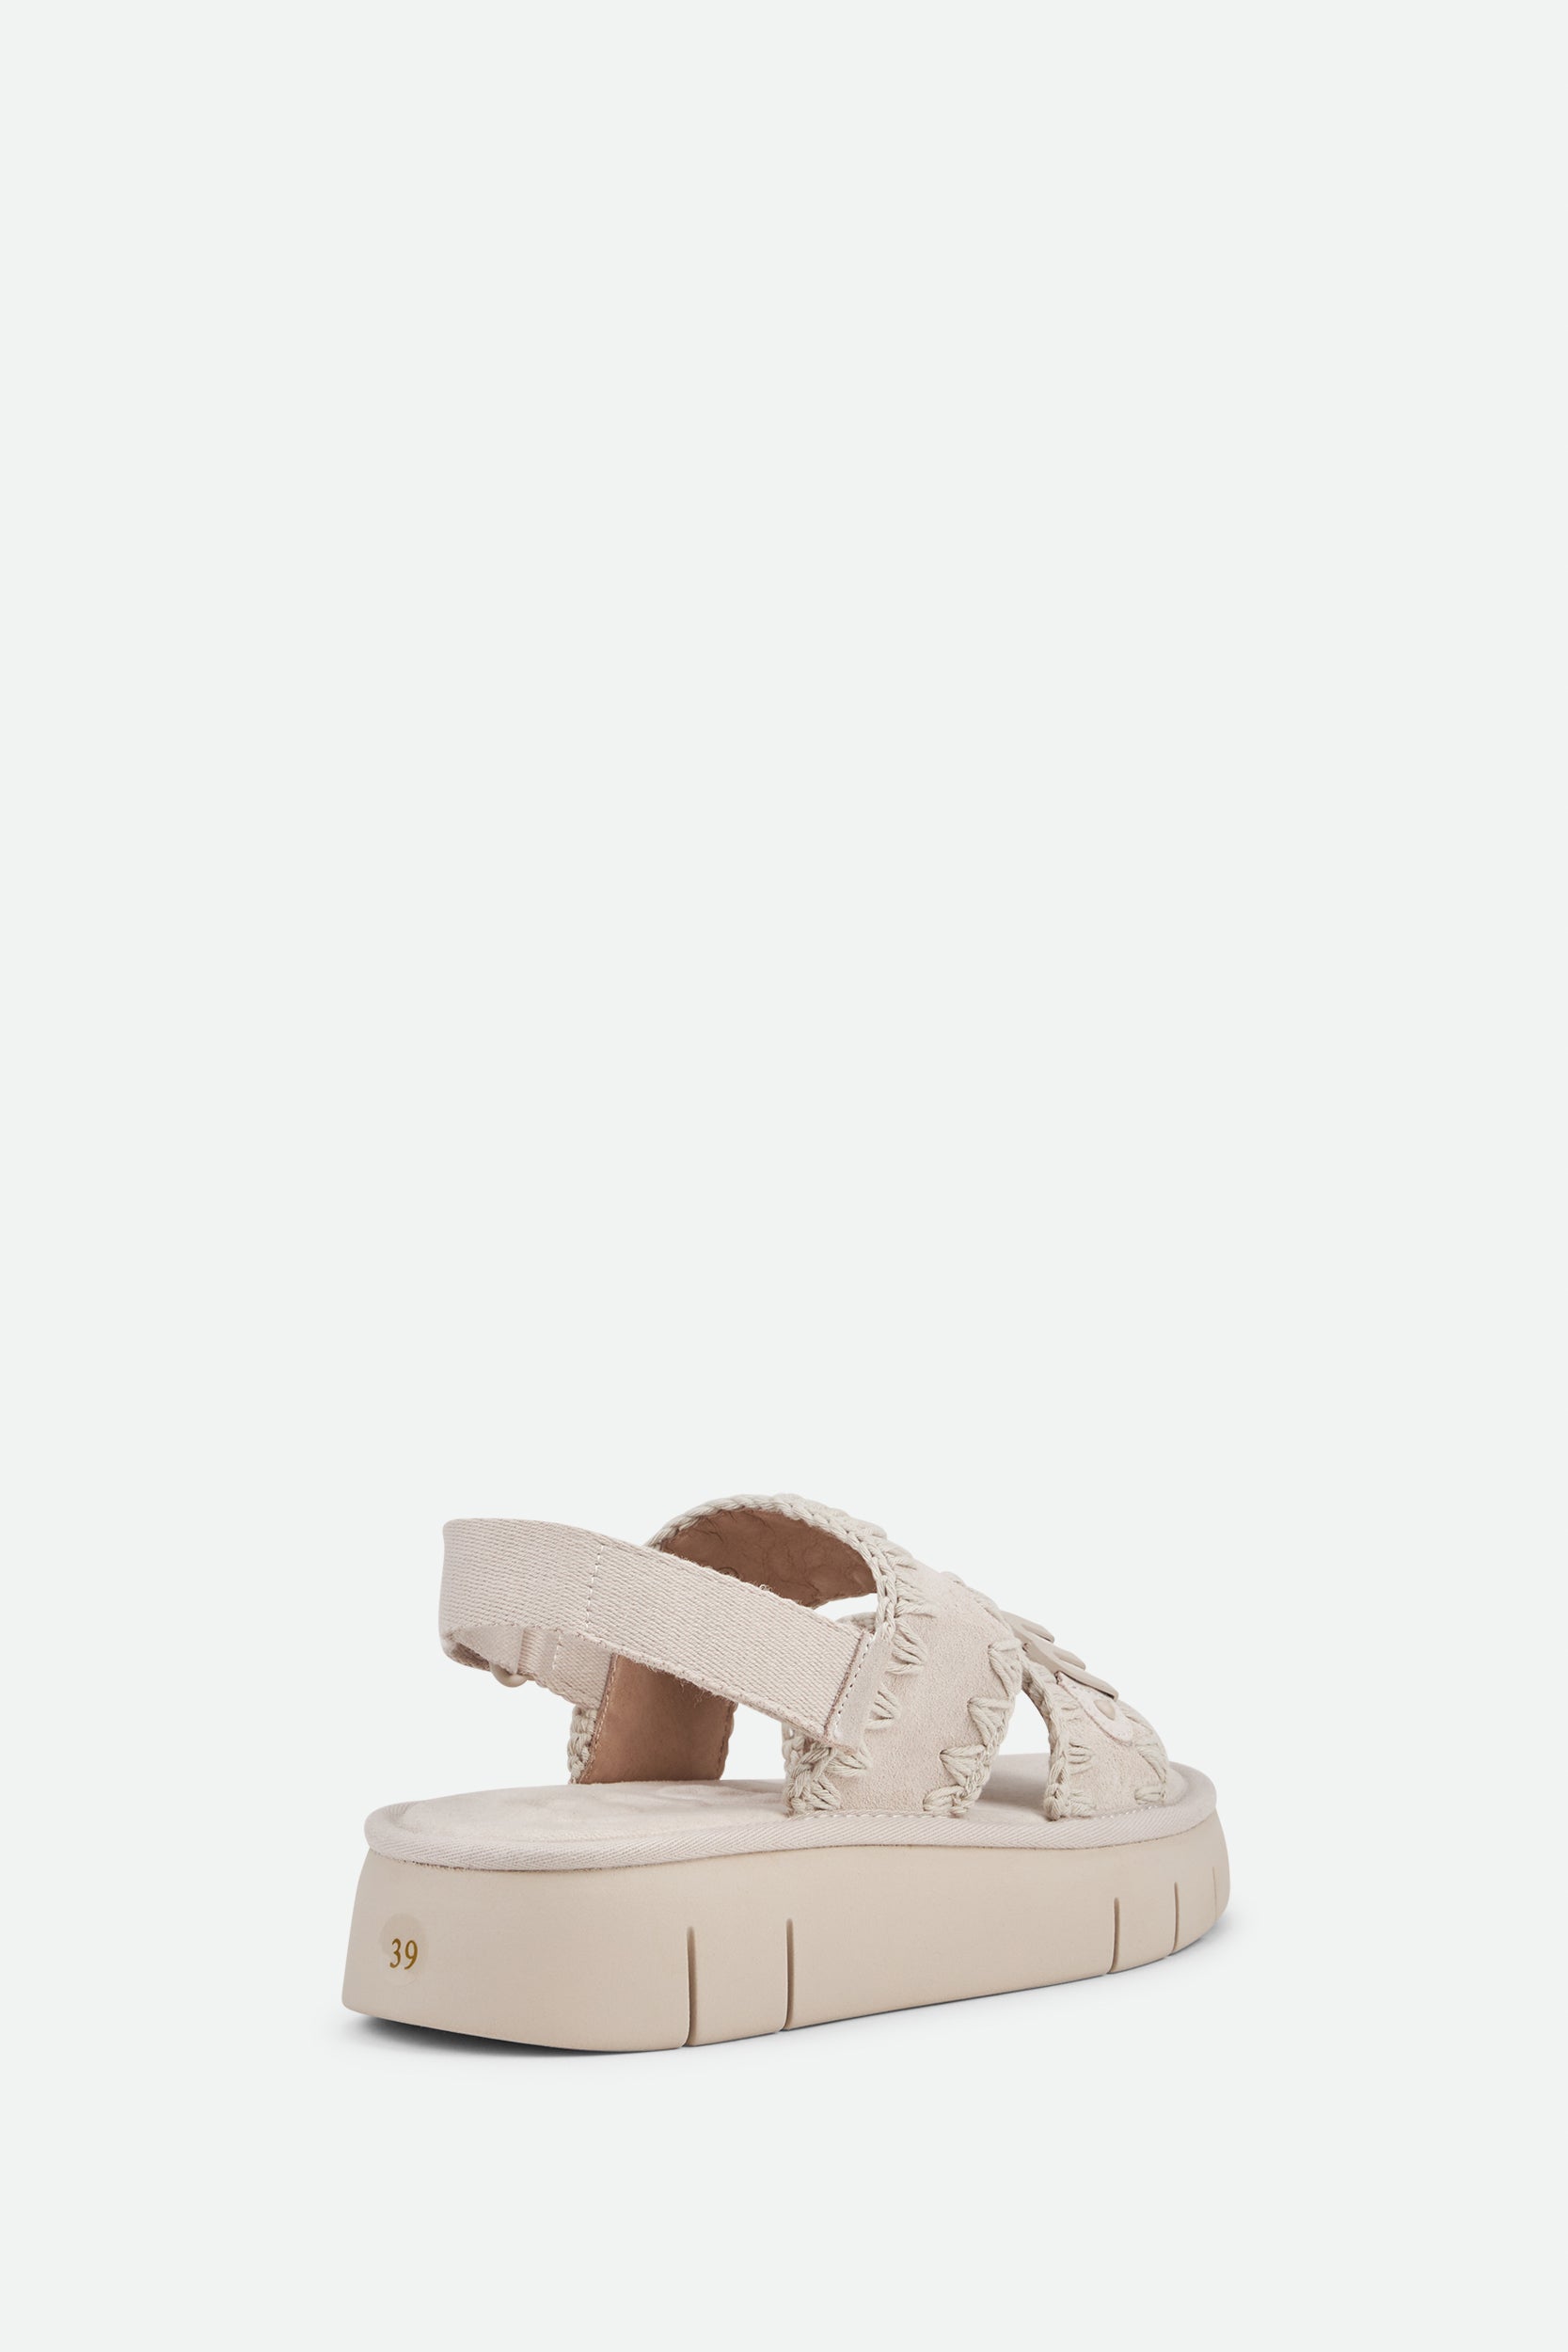 Mou Bounce White Sandals